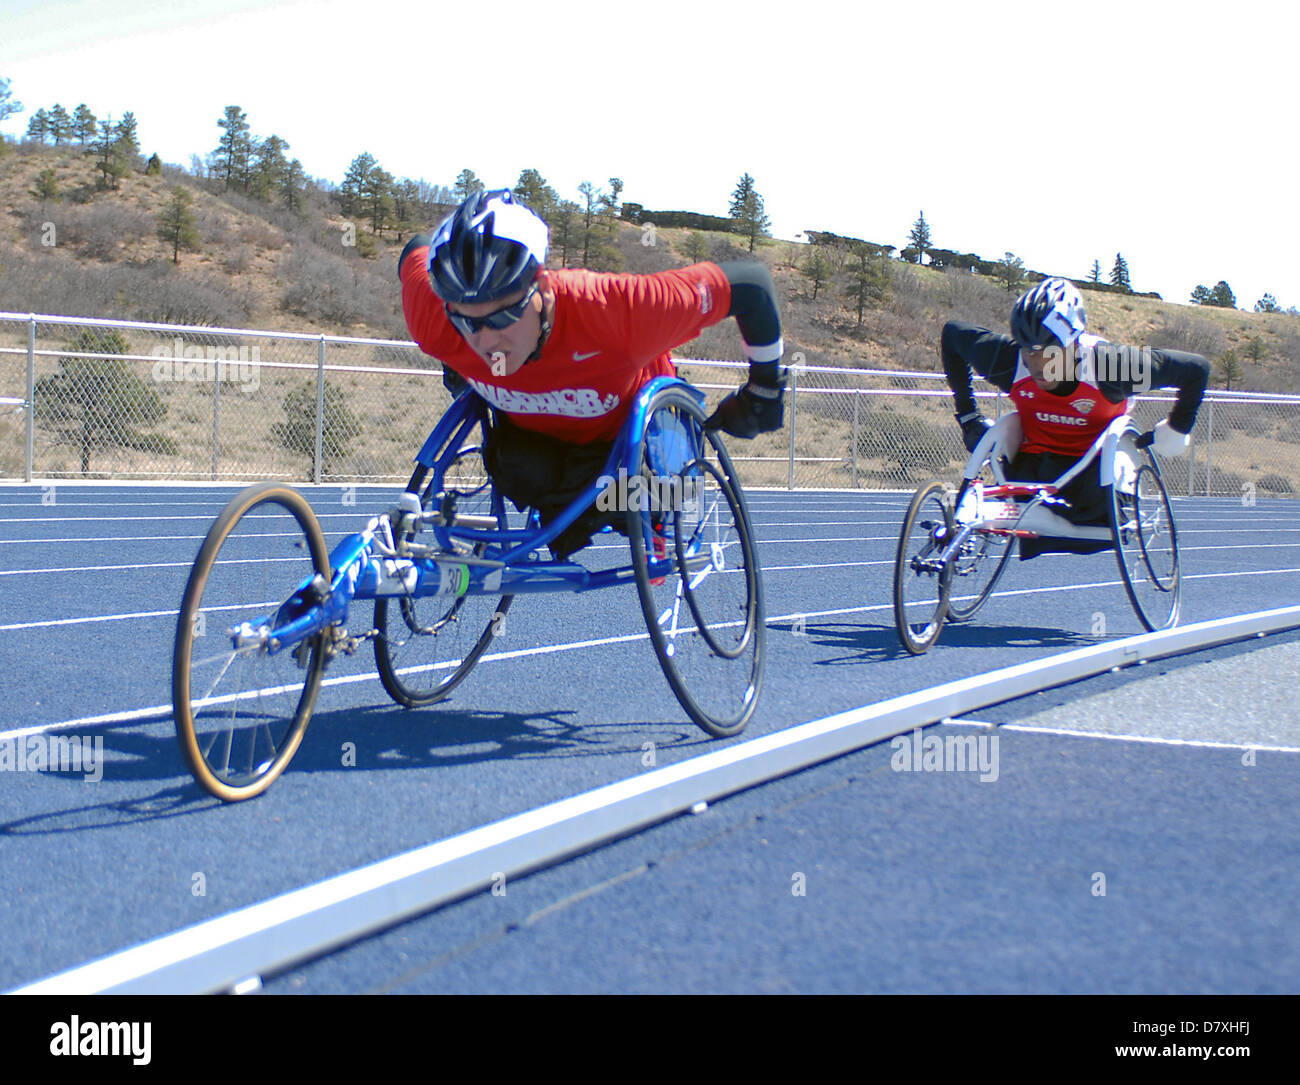 May 14, 2013: Marine Corps wounded warrior, Ivan Sears (l), leads Marine, Anthony McDaniel (r), through the first lap of the 1500 meters during Warrior Games track & field events at the United States Air Force Academy, Colorado Springs, Colorado. Over 260 injured and disabled service men and women have gathered in Colorado Springs to compete in seven sports, May 11-16. All branches of the military are represented, including Special Operations and members of the British Armed Forces. Stock Photo